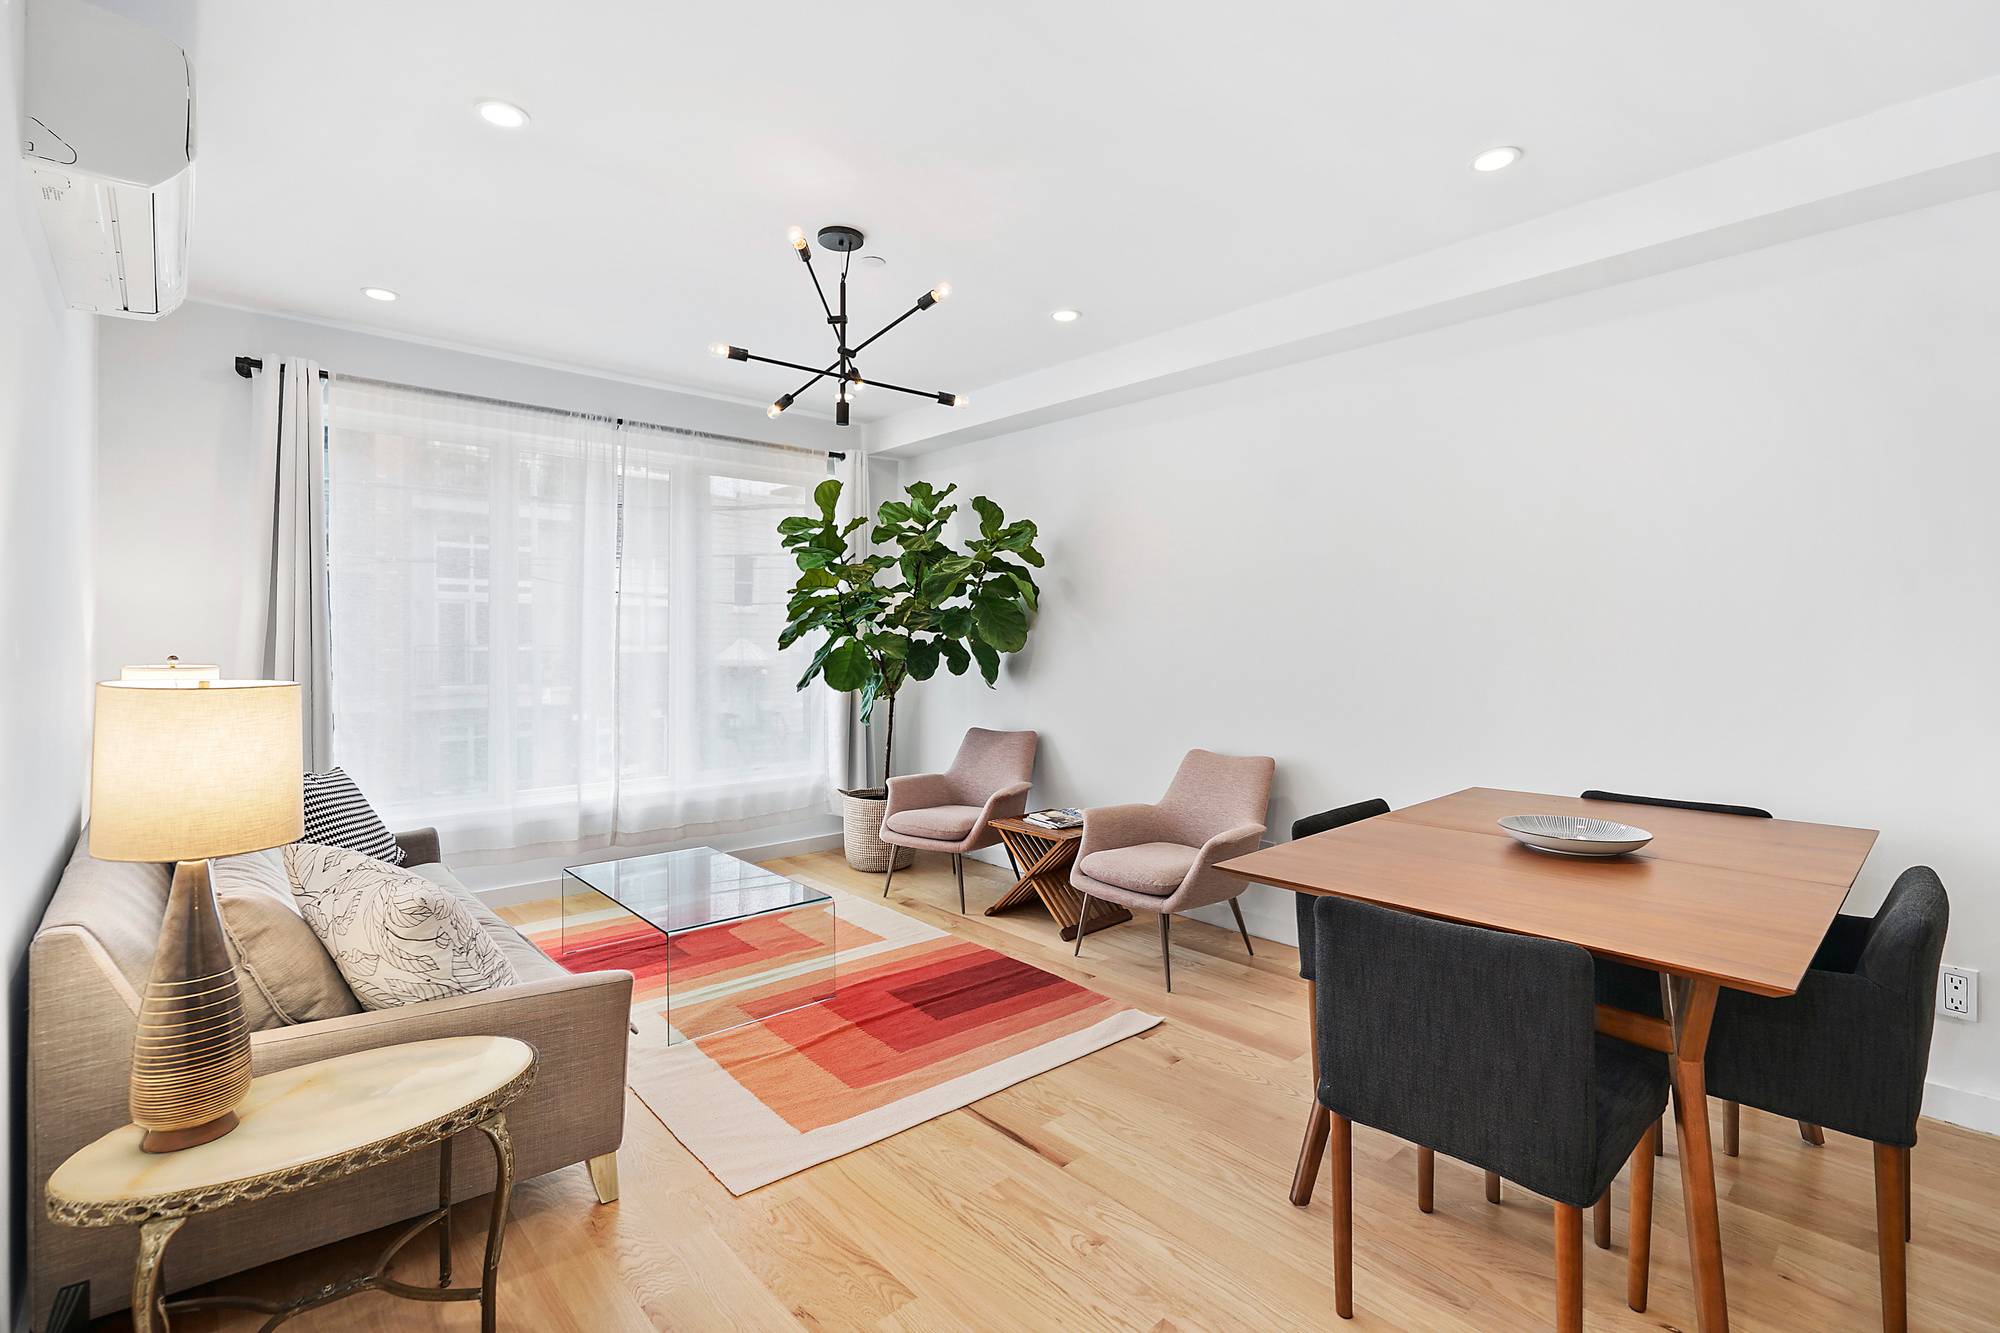 This bright amp ; beautiful 3 bedroom, 2 bathroom home with separate dining alcove was completed in 2018 as part of a boutique condo in the heart of East Williamsburg.